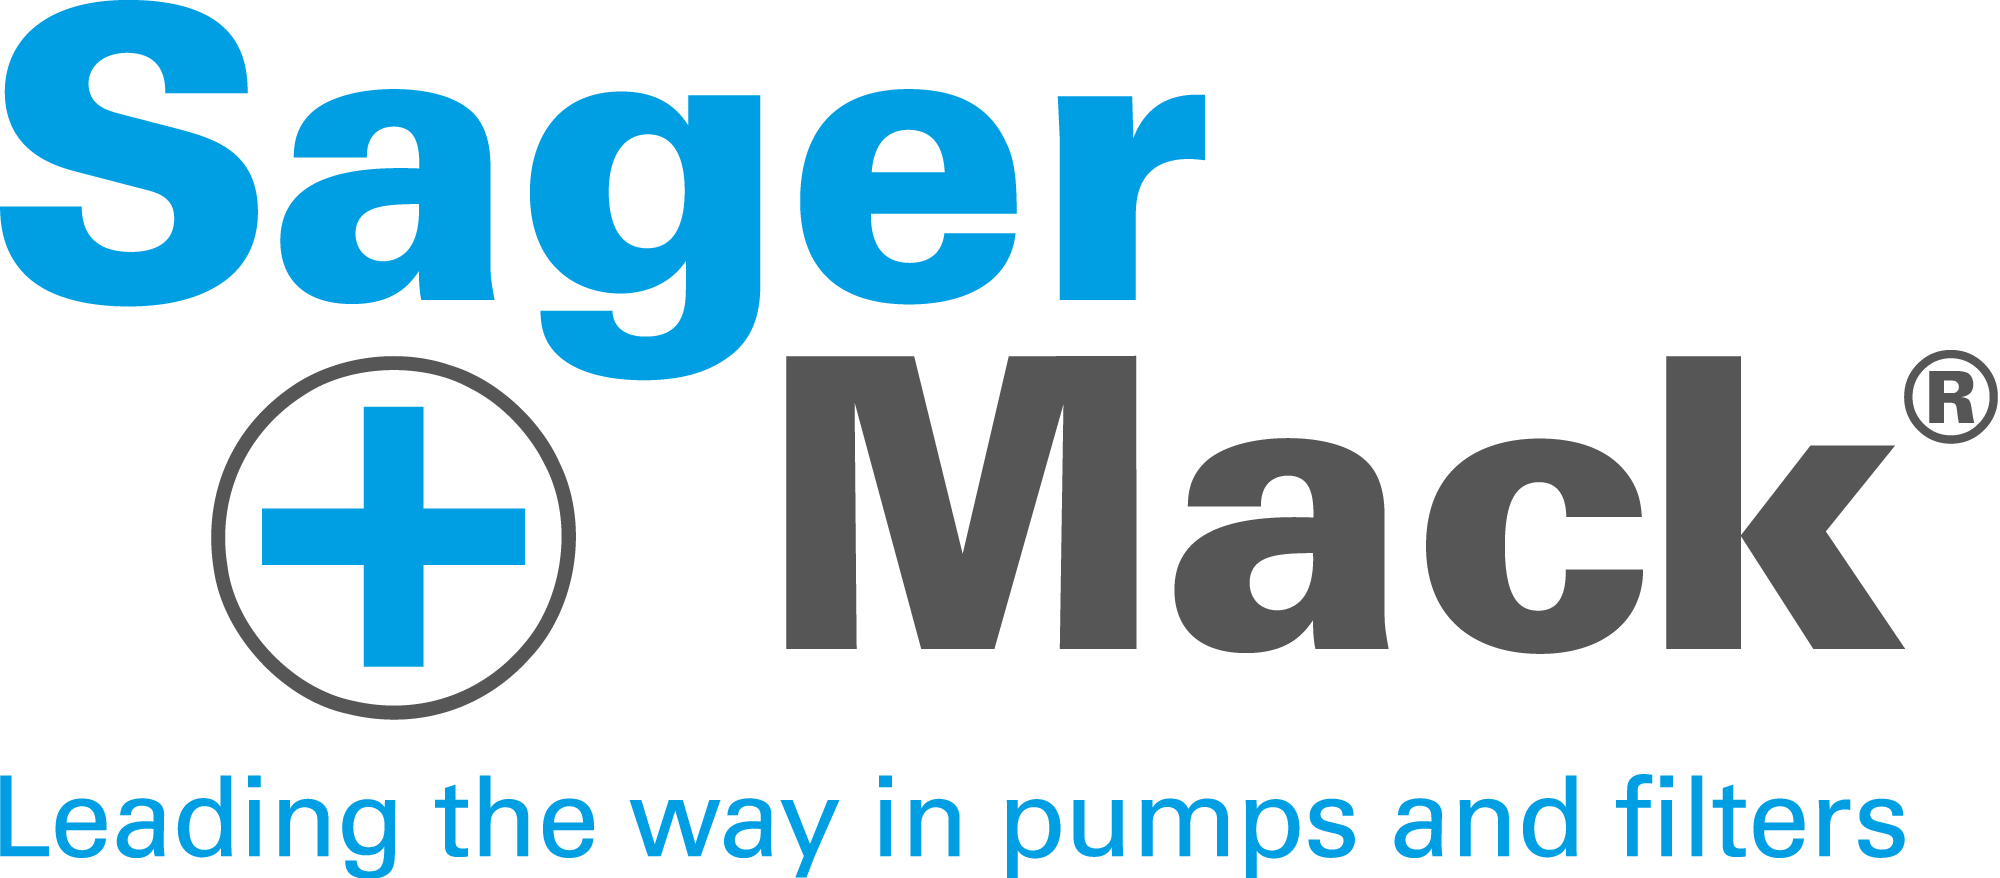 Sager + Mack GmbH | Leading the way in pumps and filters